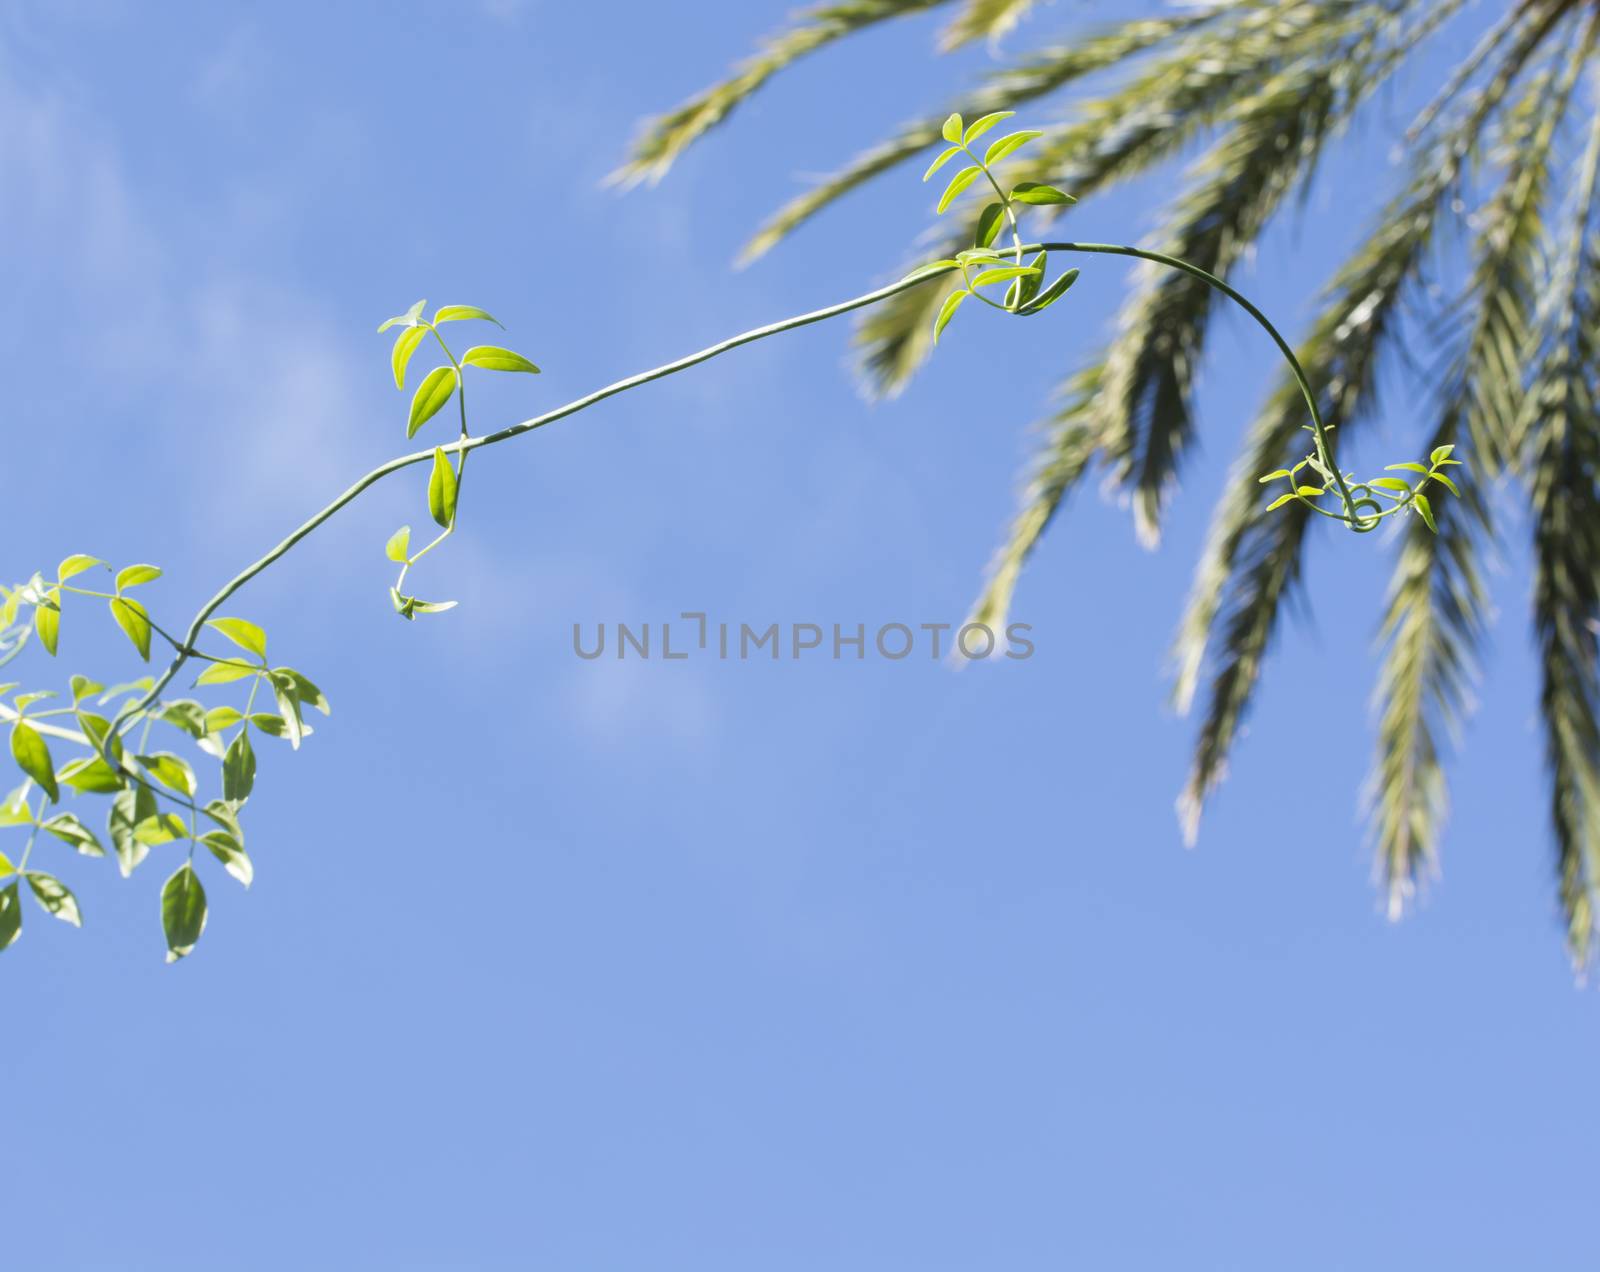 Green leafy plant growing against blue sky with palm tree in the background. Mallorca, Balearic islands, Spain.